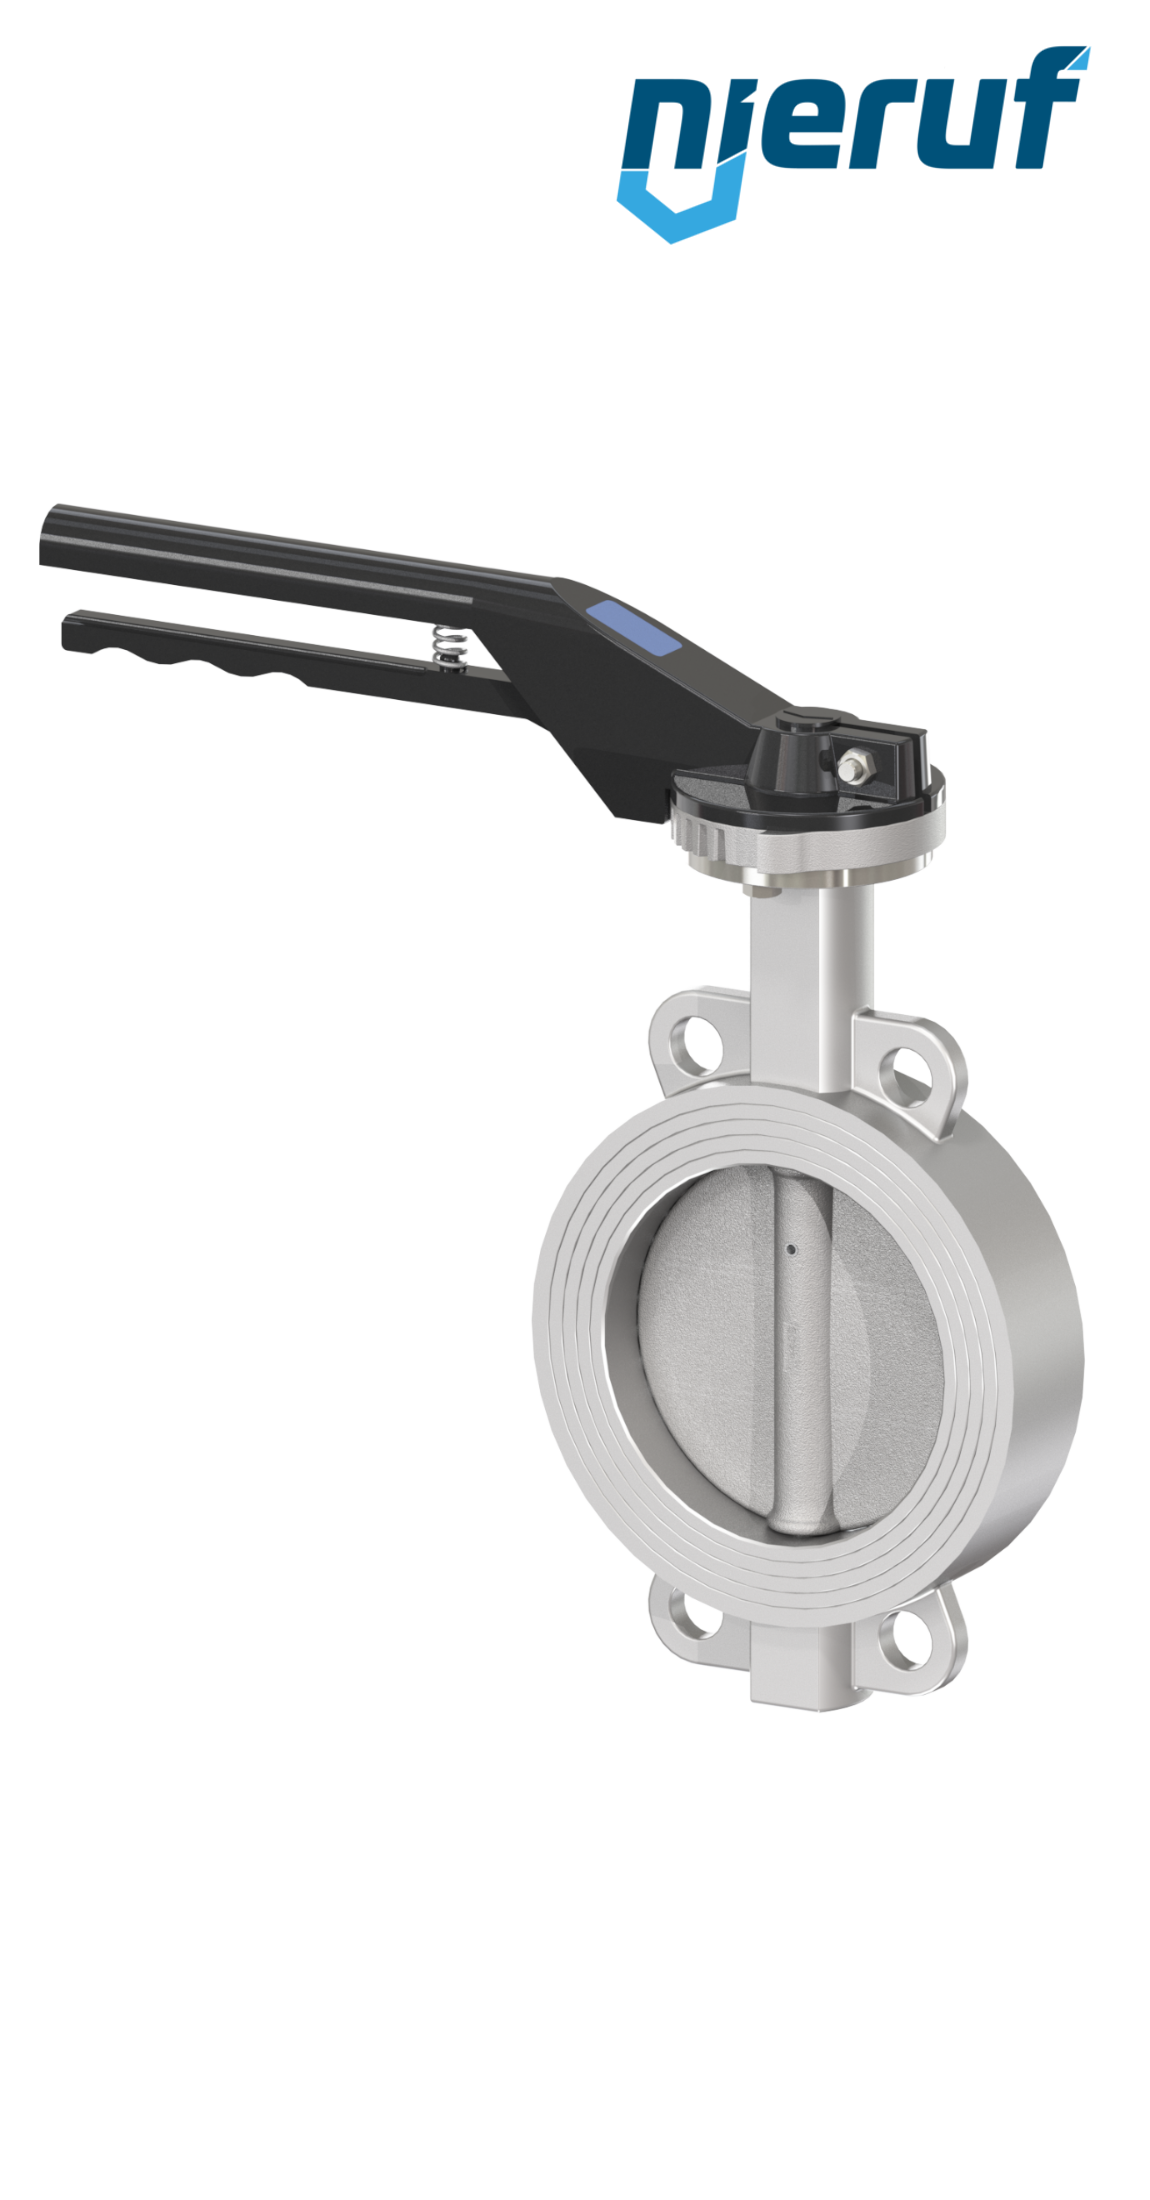 Butterfly-valve-stainless-steel DN 80 PN16 AK08 metall notch lever